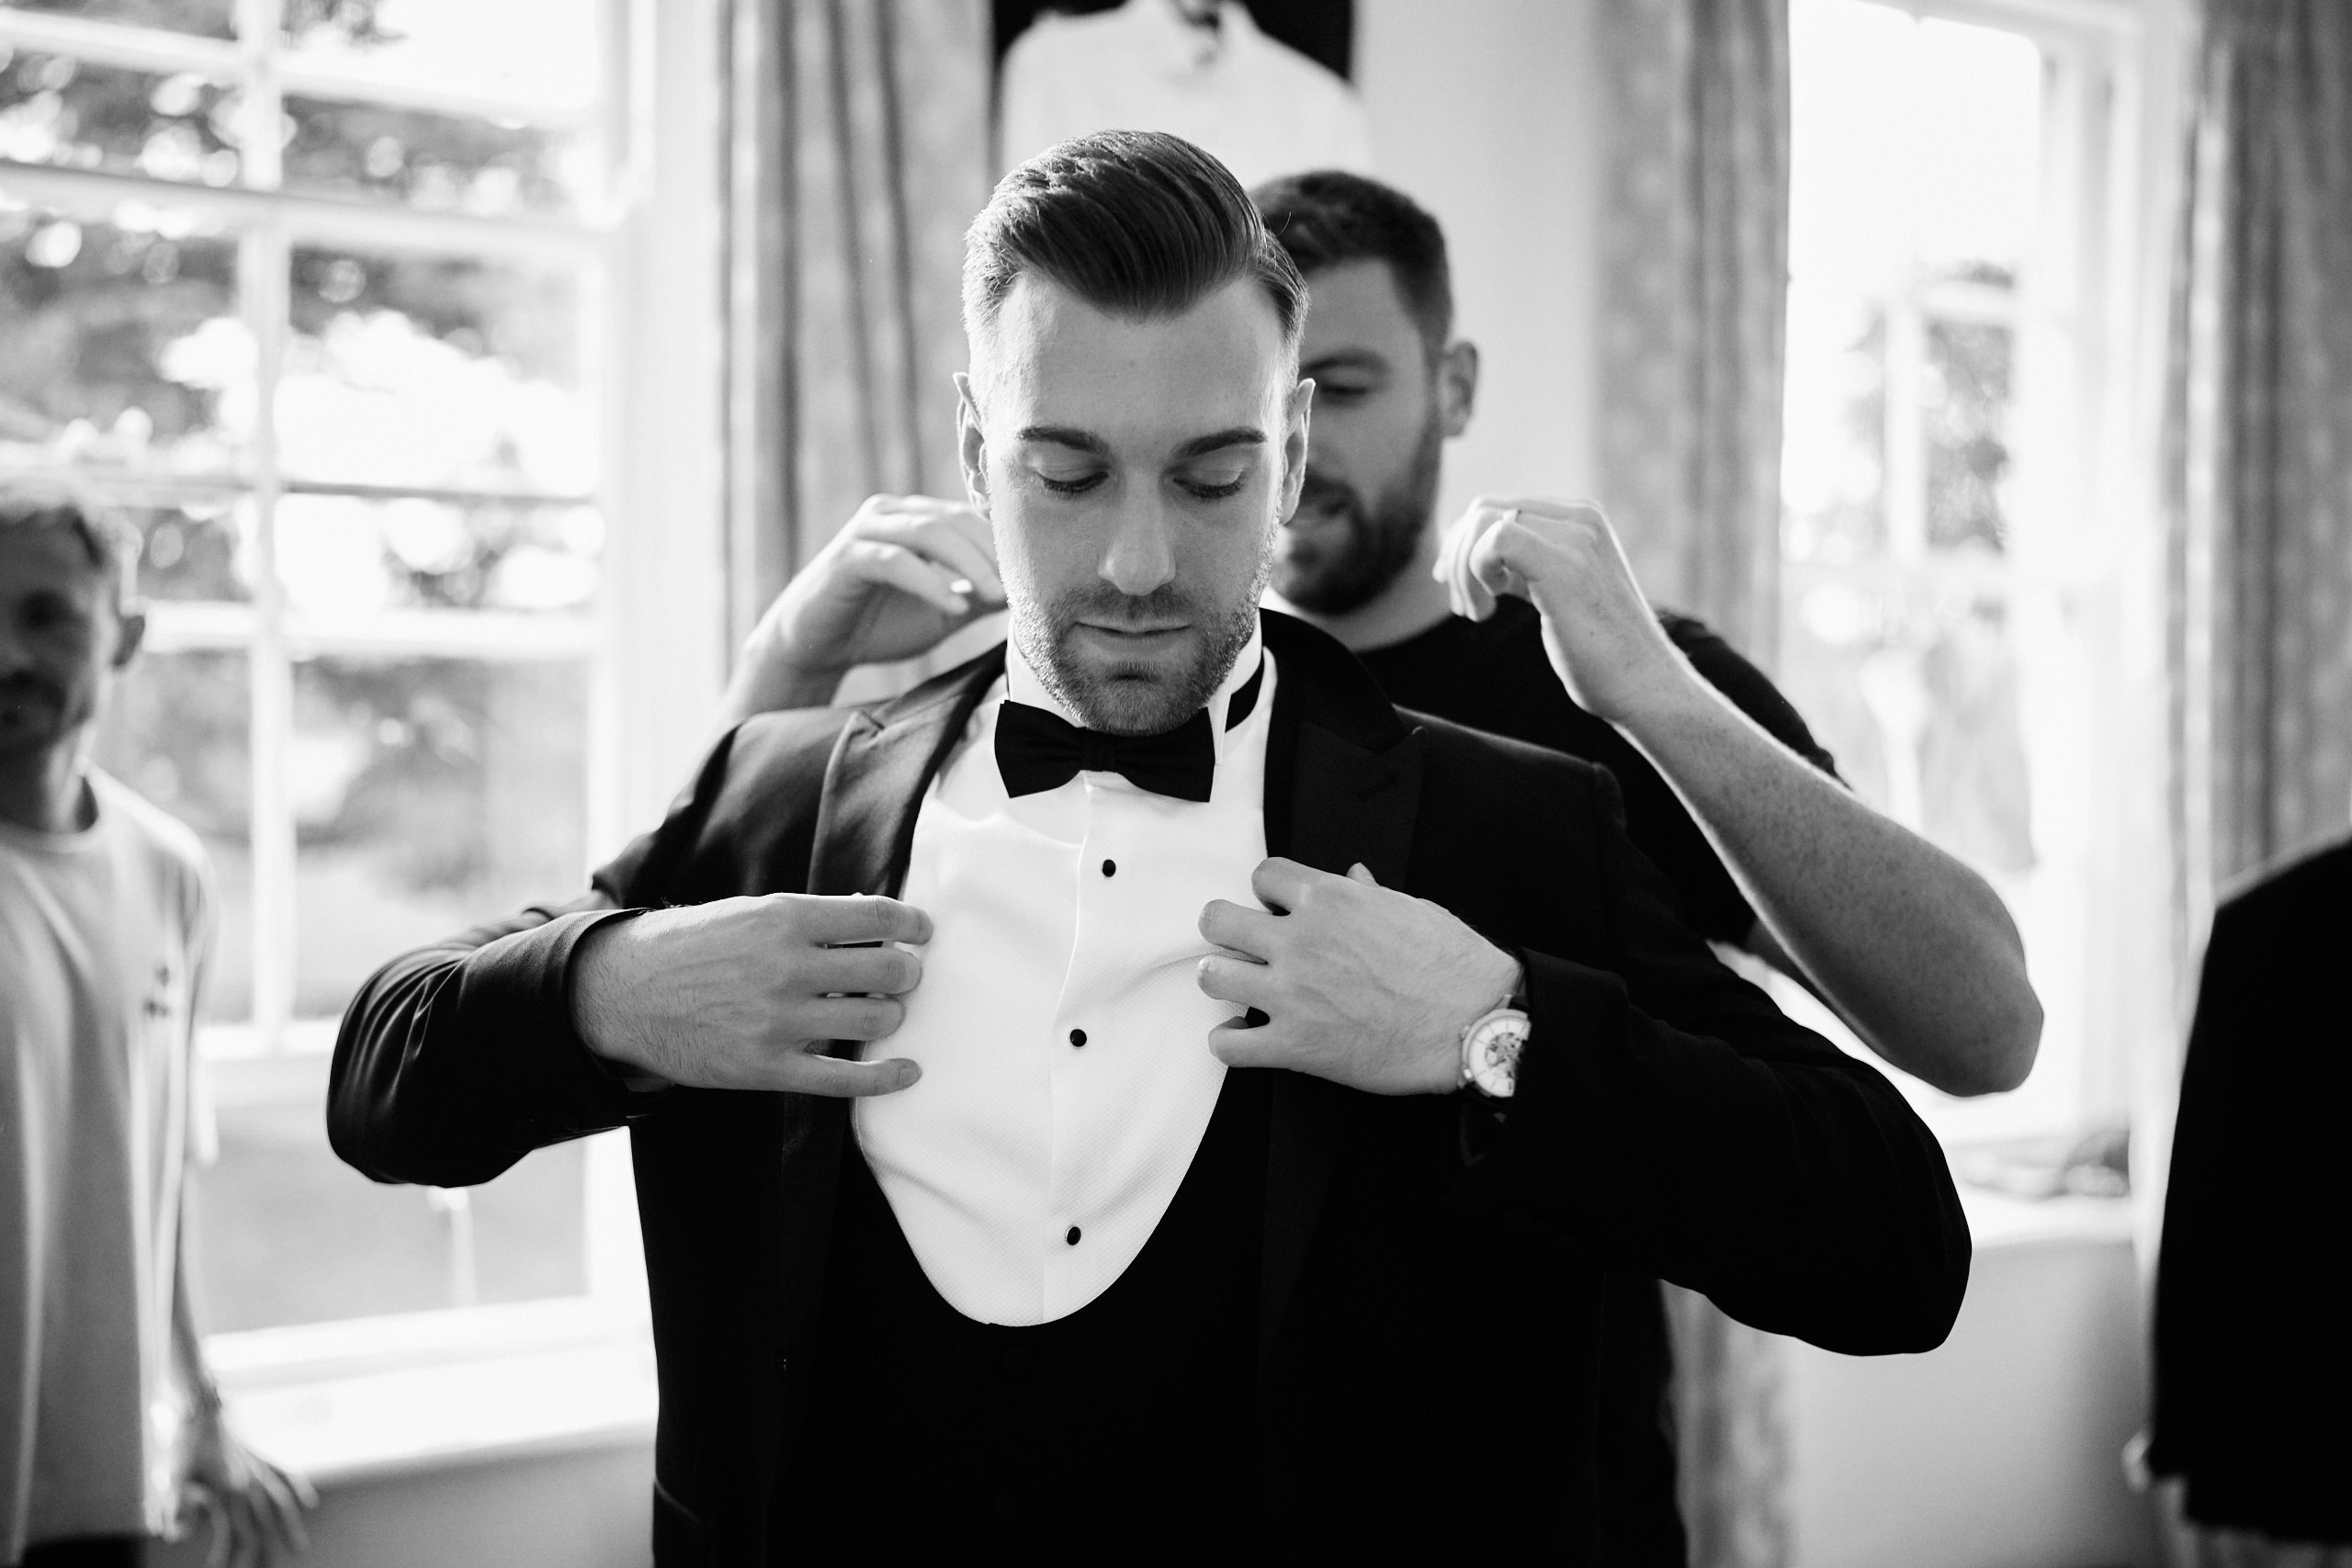 A man in a tuxedo is adjusting his tie.